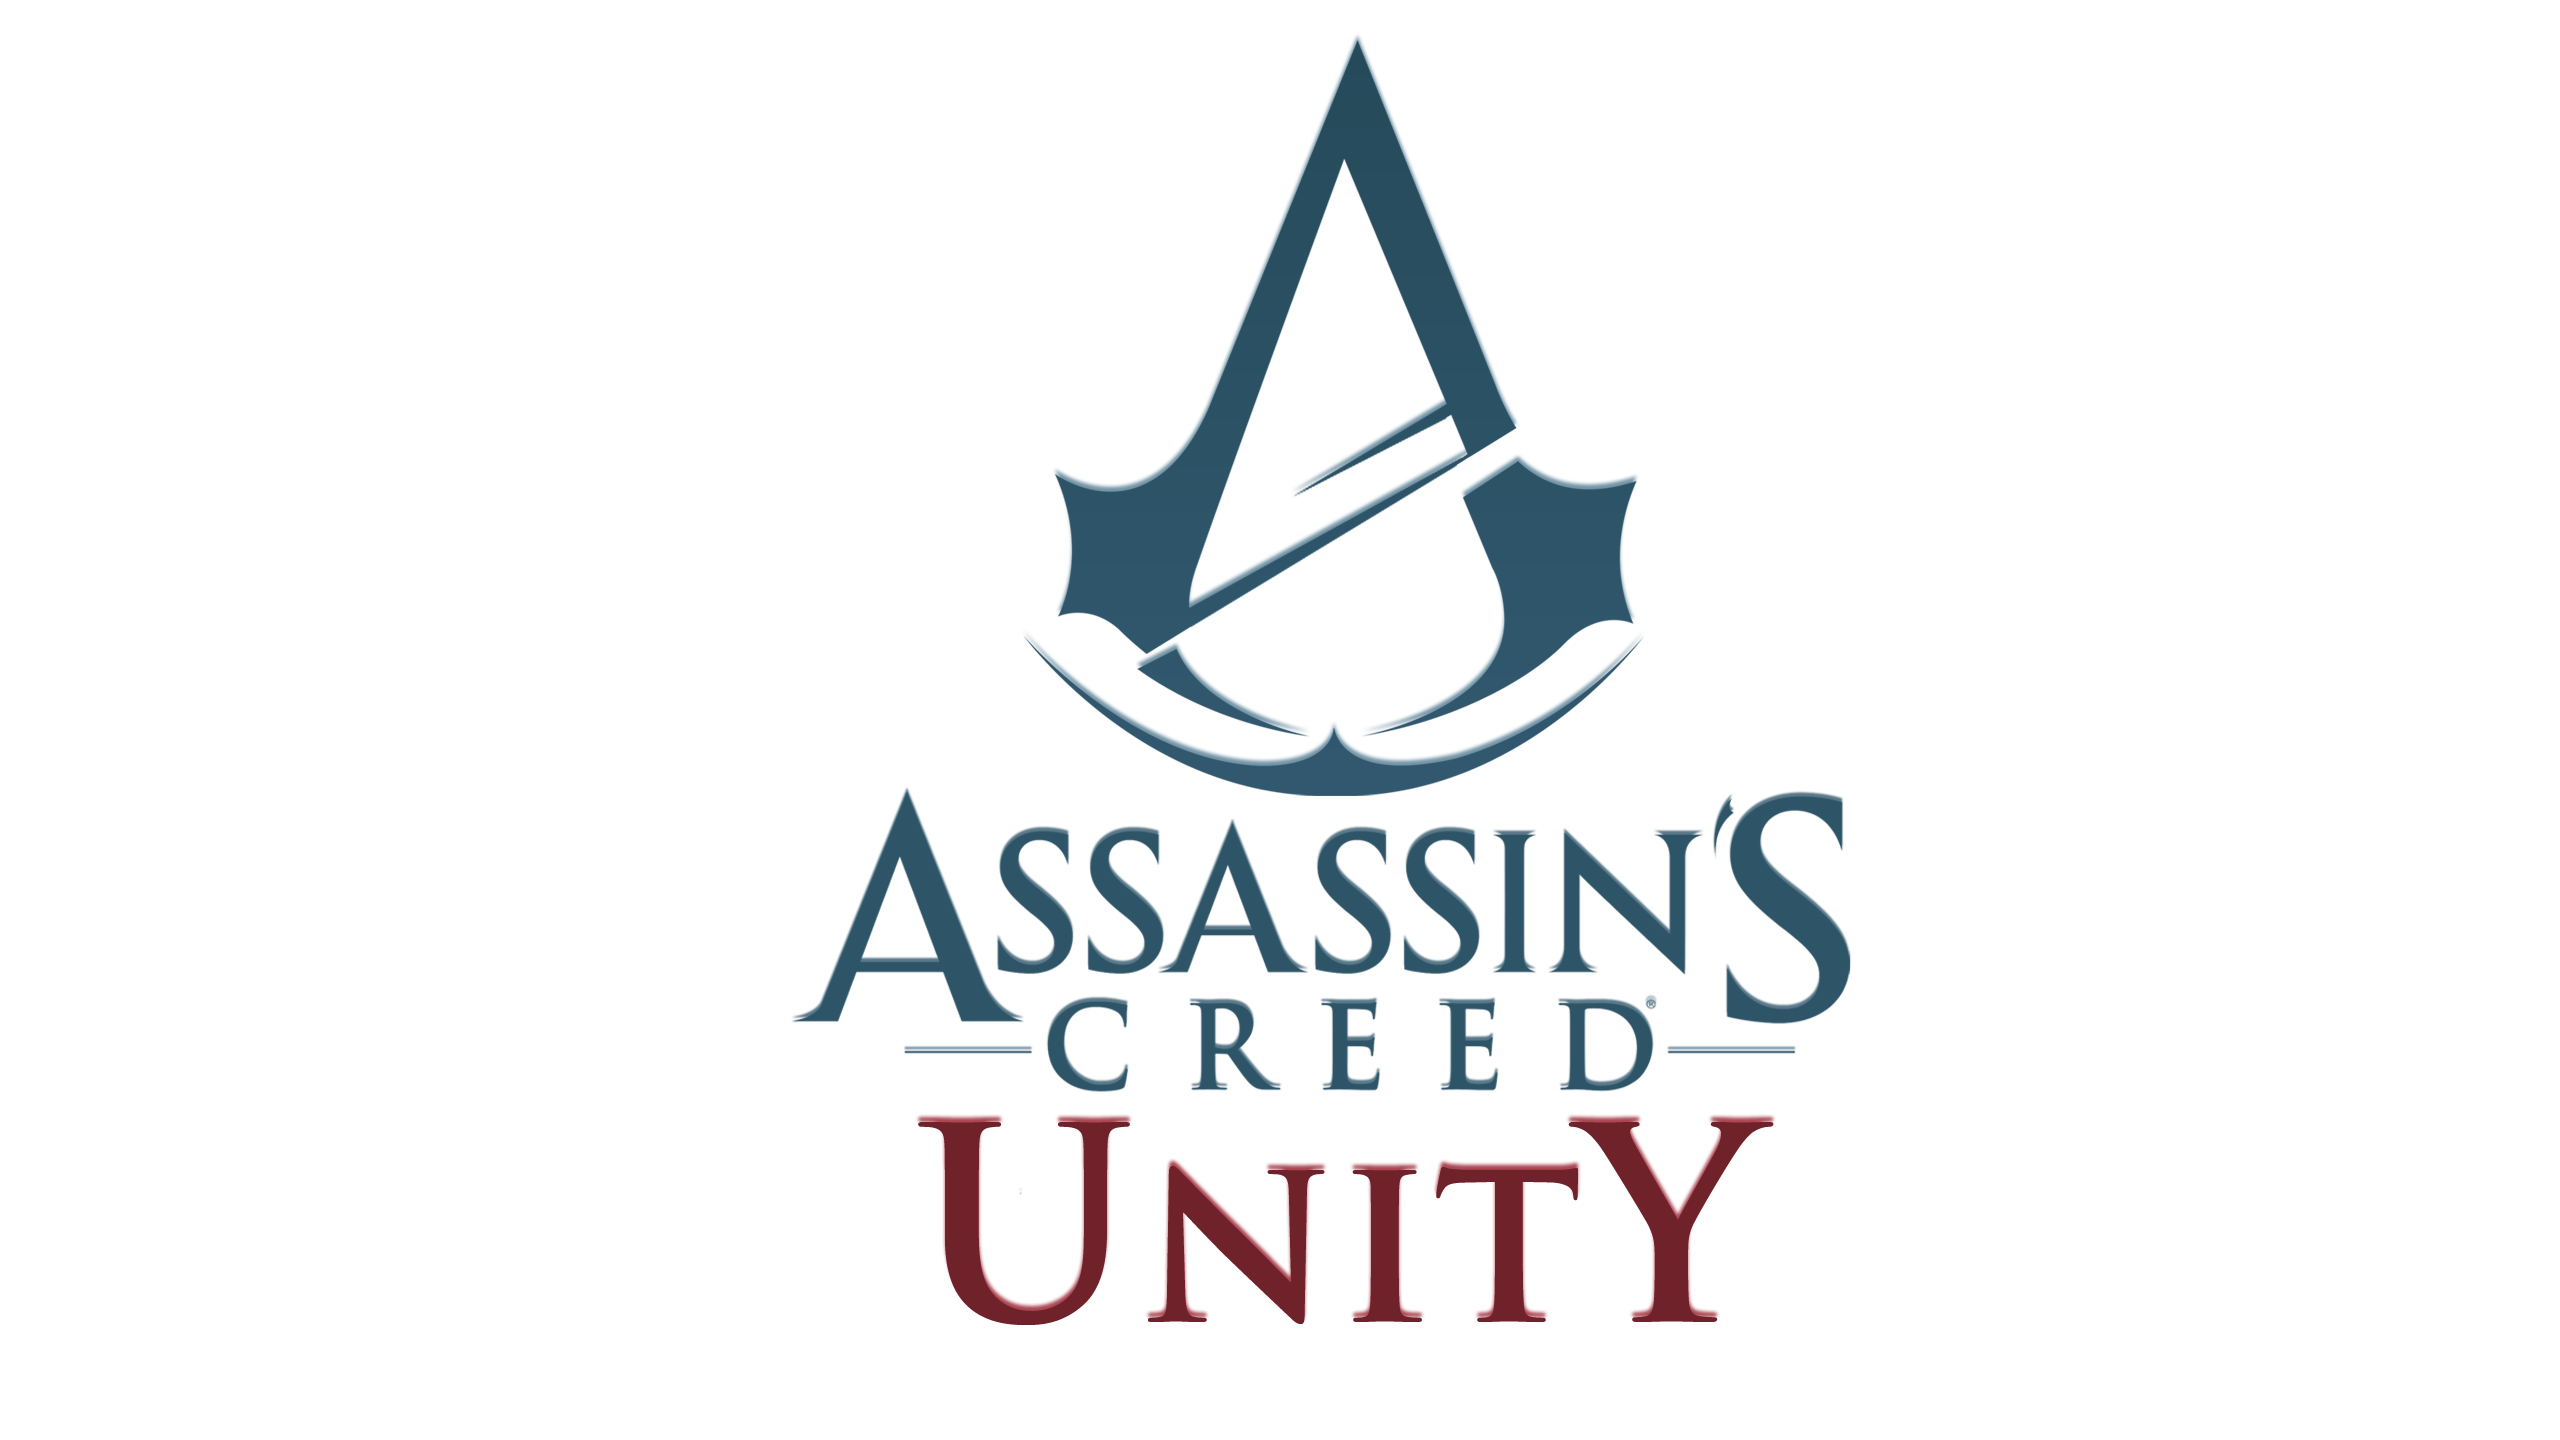 Assassins Creed Unity PNG Fre